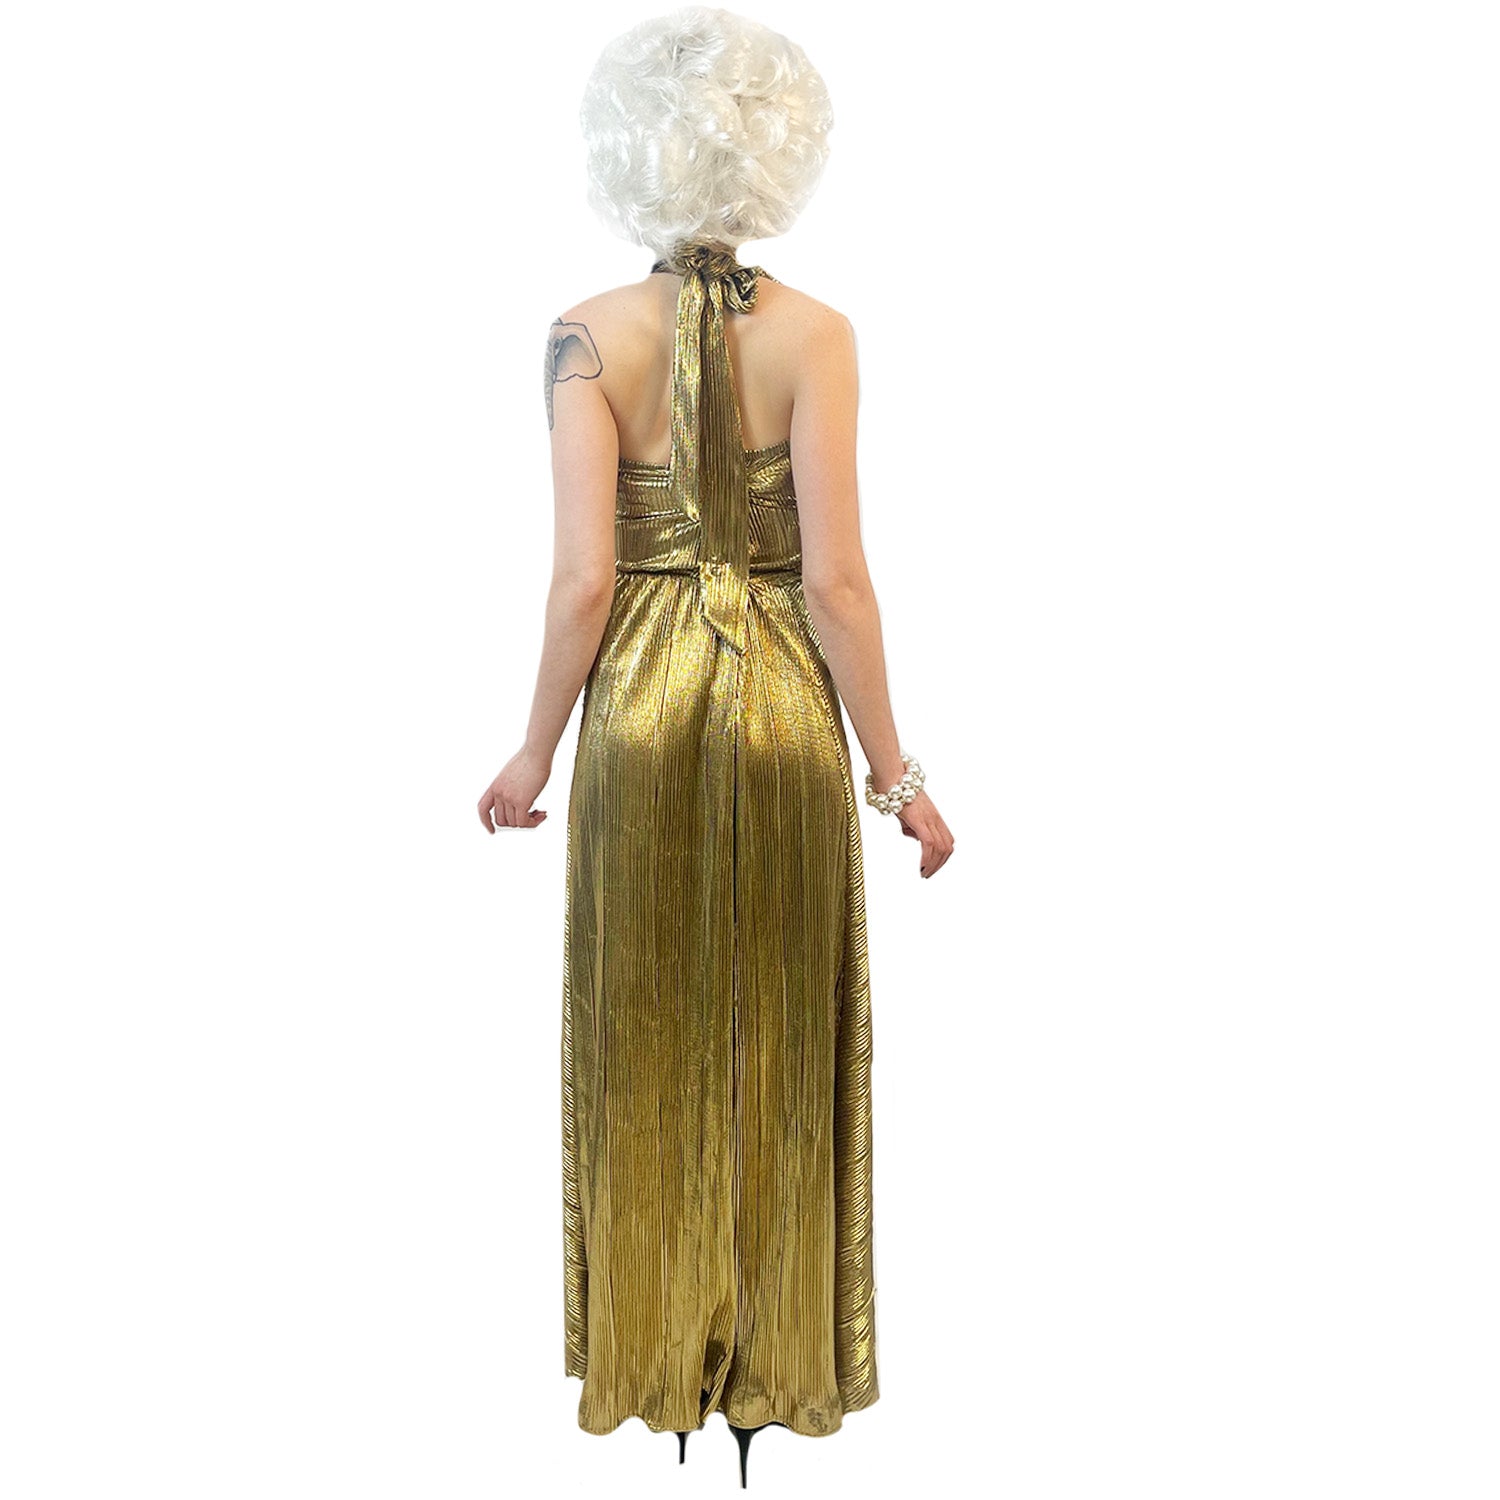 Exclusive Marilyn Monroe Iconic Gold Dress Women's Adult Costume